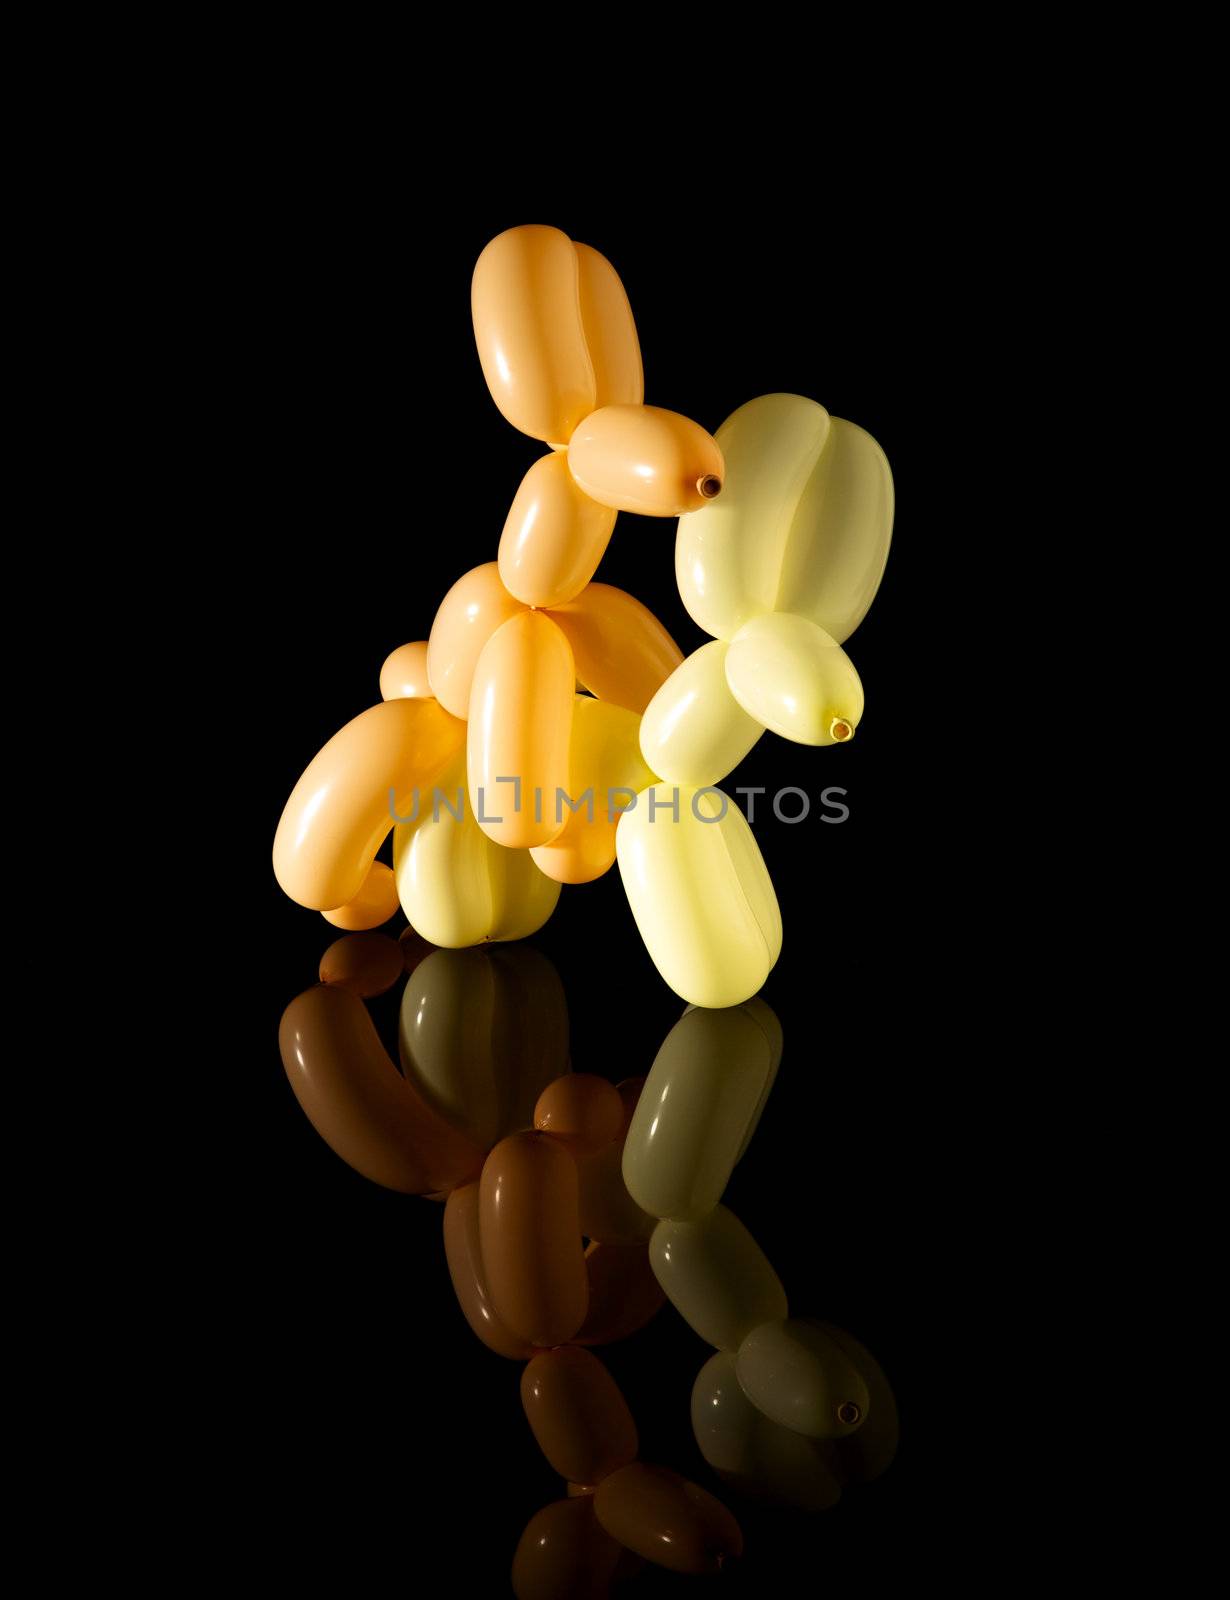 Two balloon dogs mating